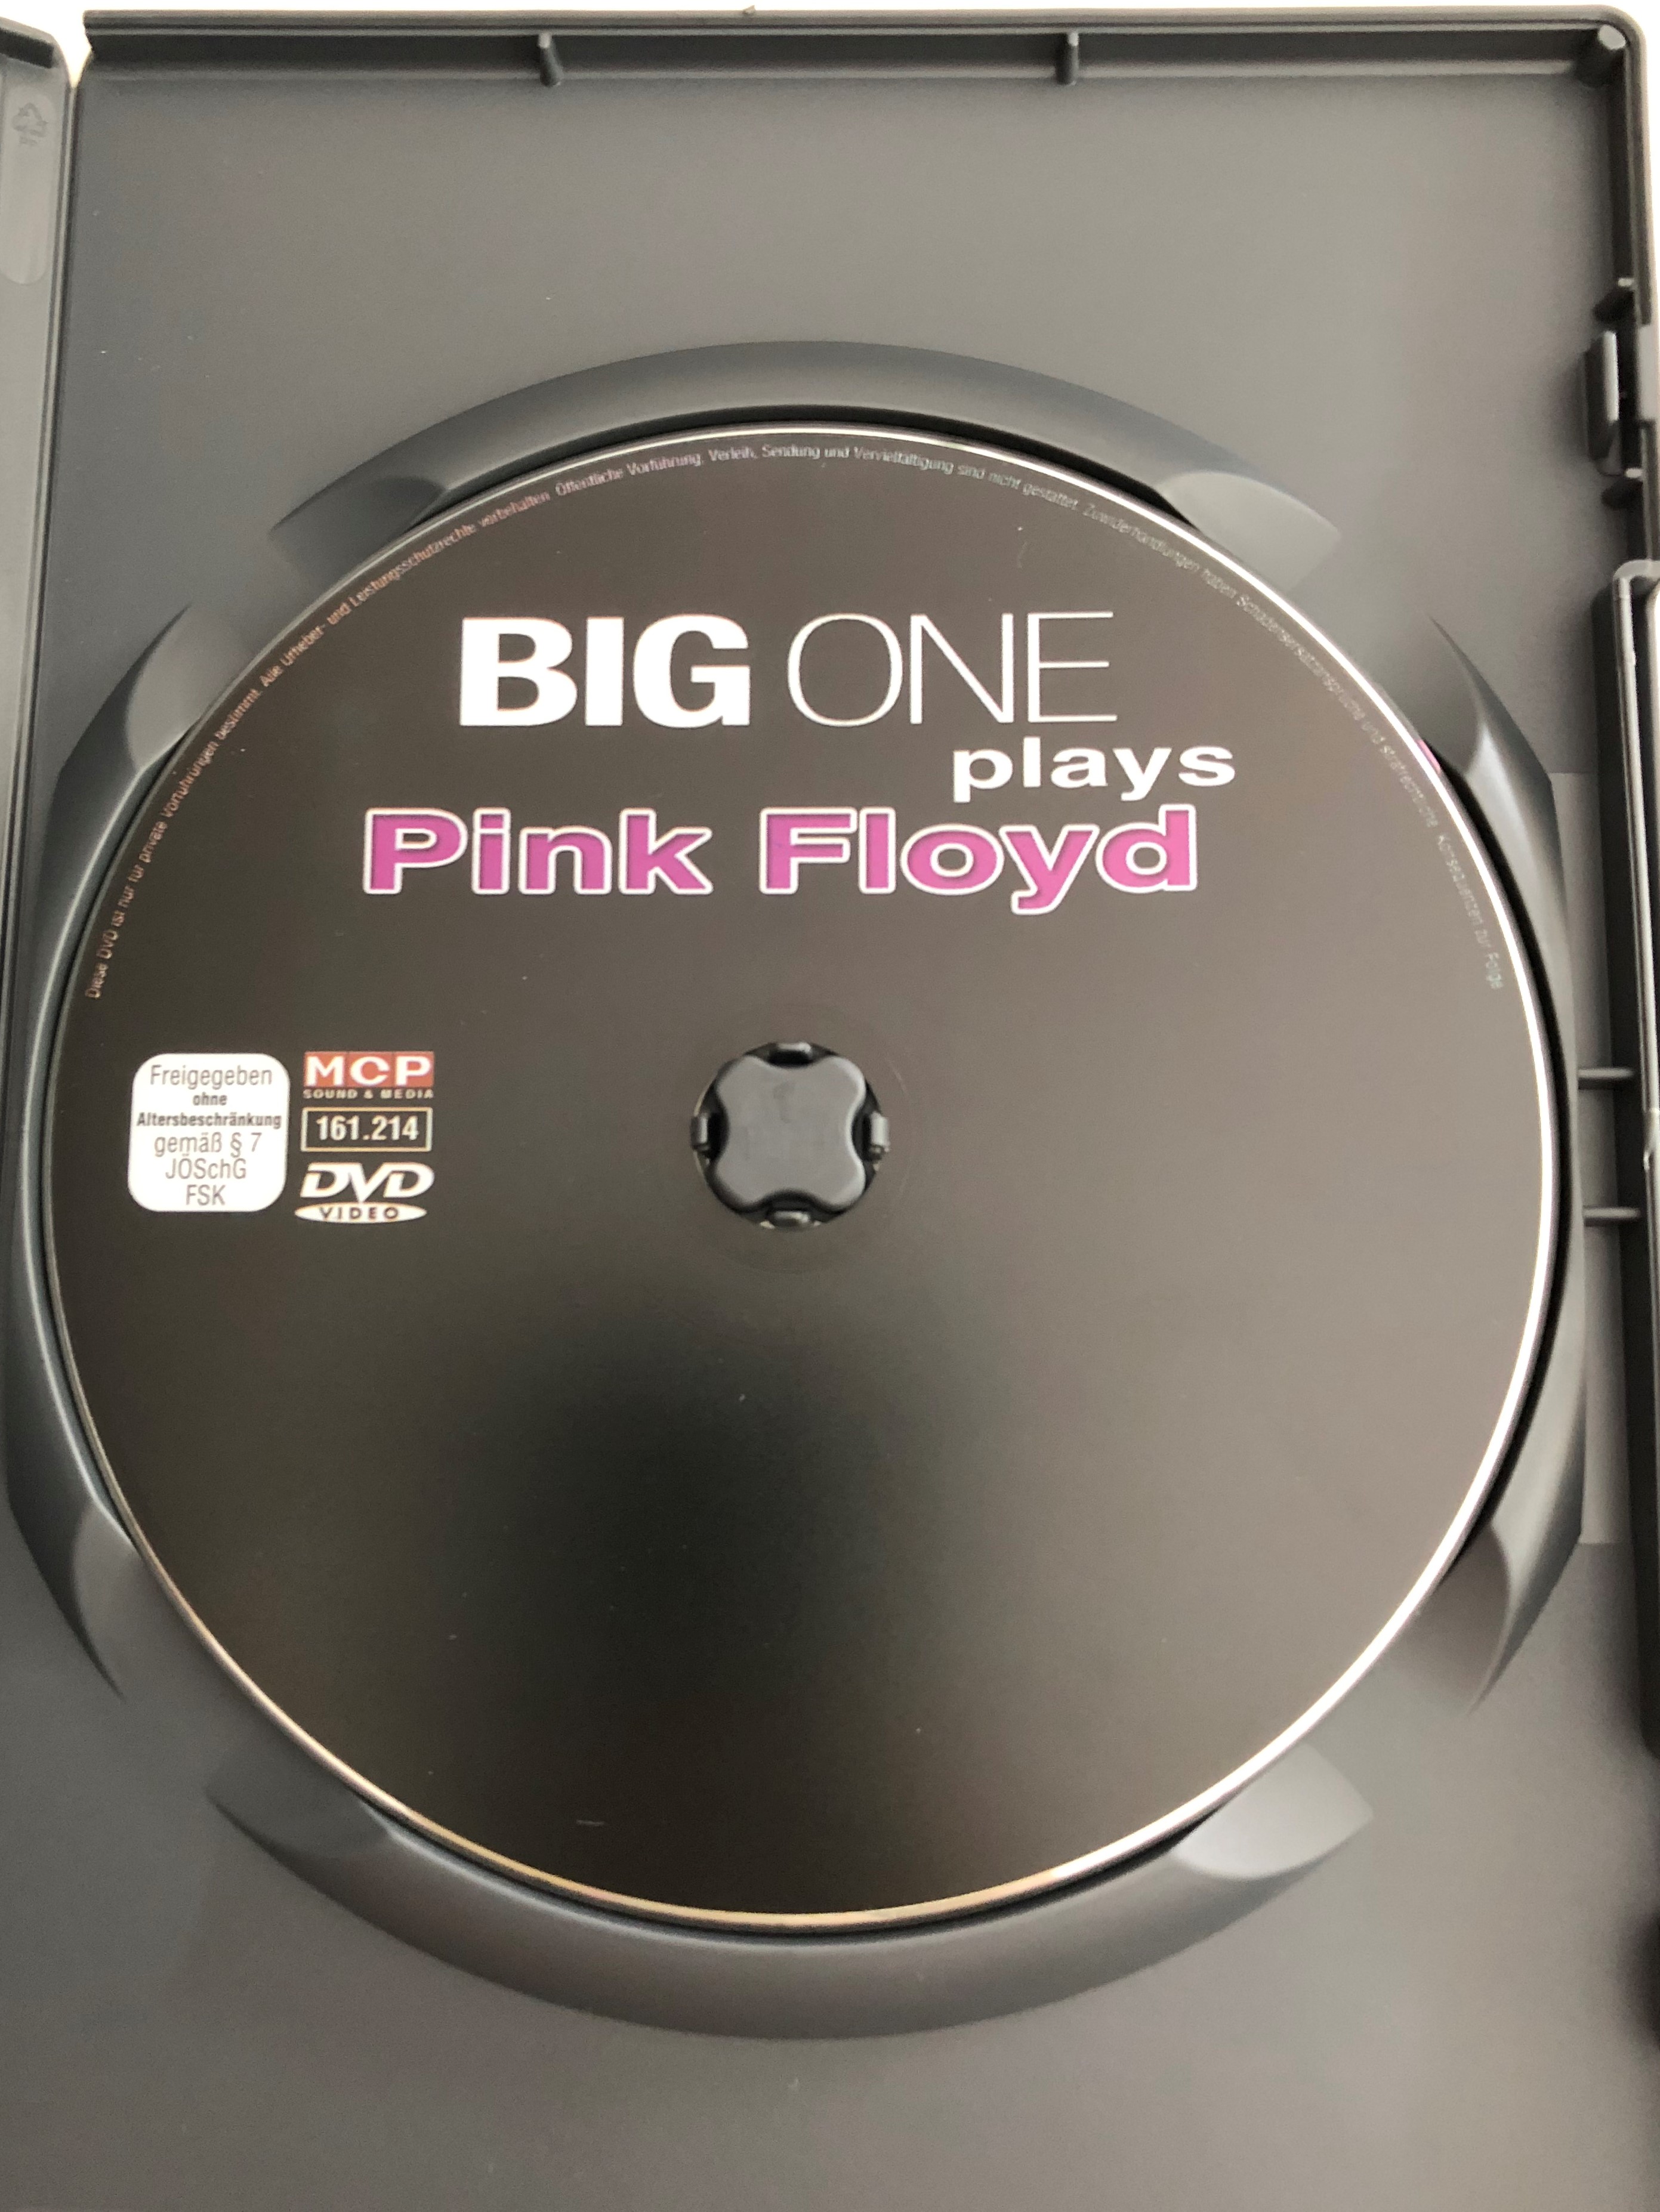 big-one-play-pink-floyd-dvd-live-on-tour-wish-you-were-here-comfortably-numb-another-brick-in-the-wall-2-.jpg